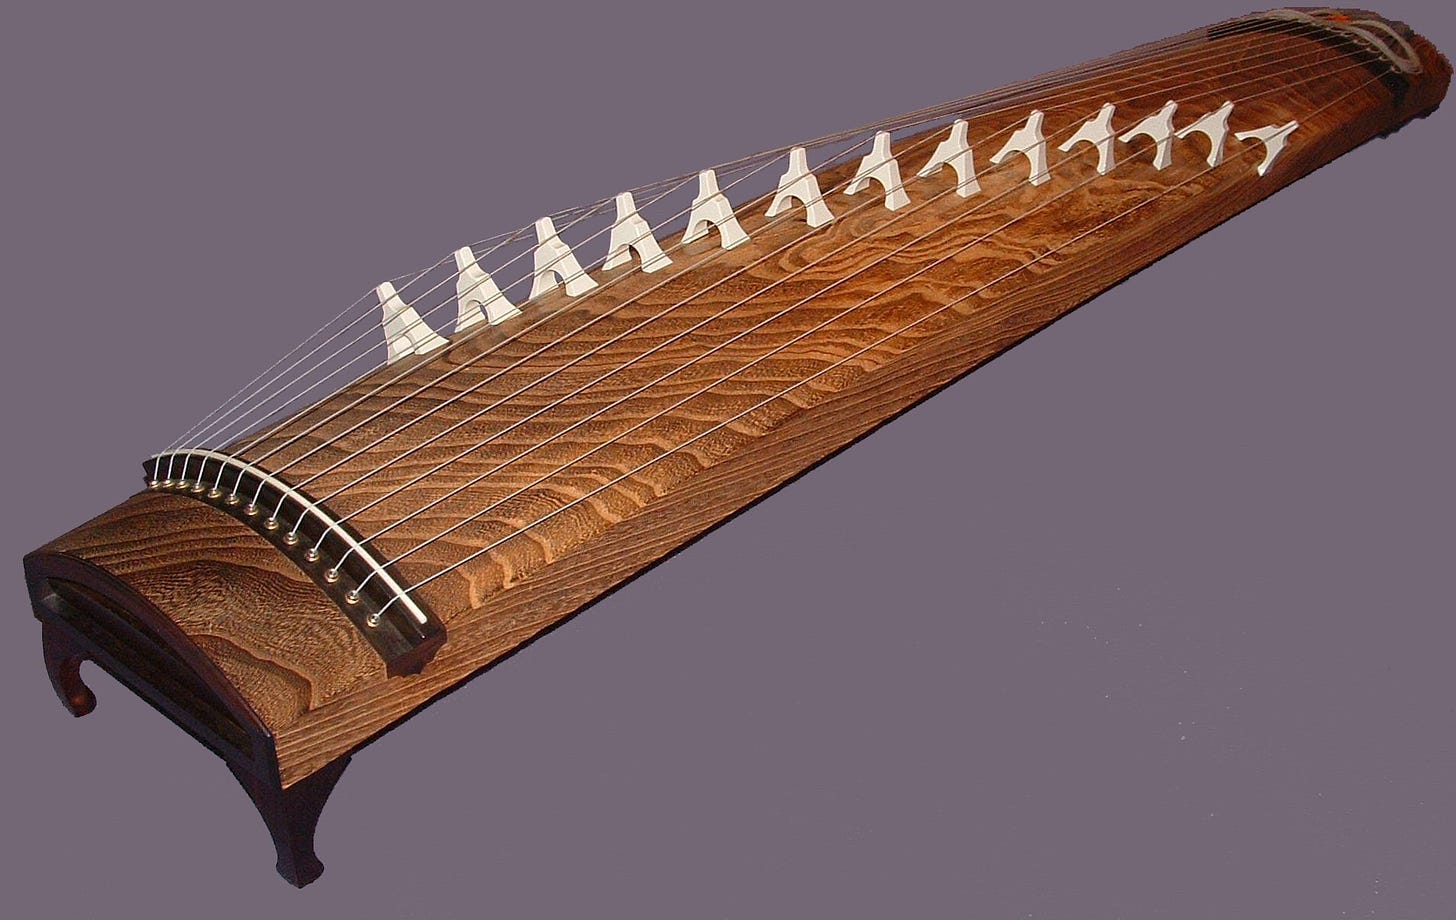 A long, rectangular wood instrument with a slight horizontal curve, strung along its length with raised strings.